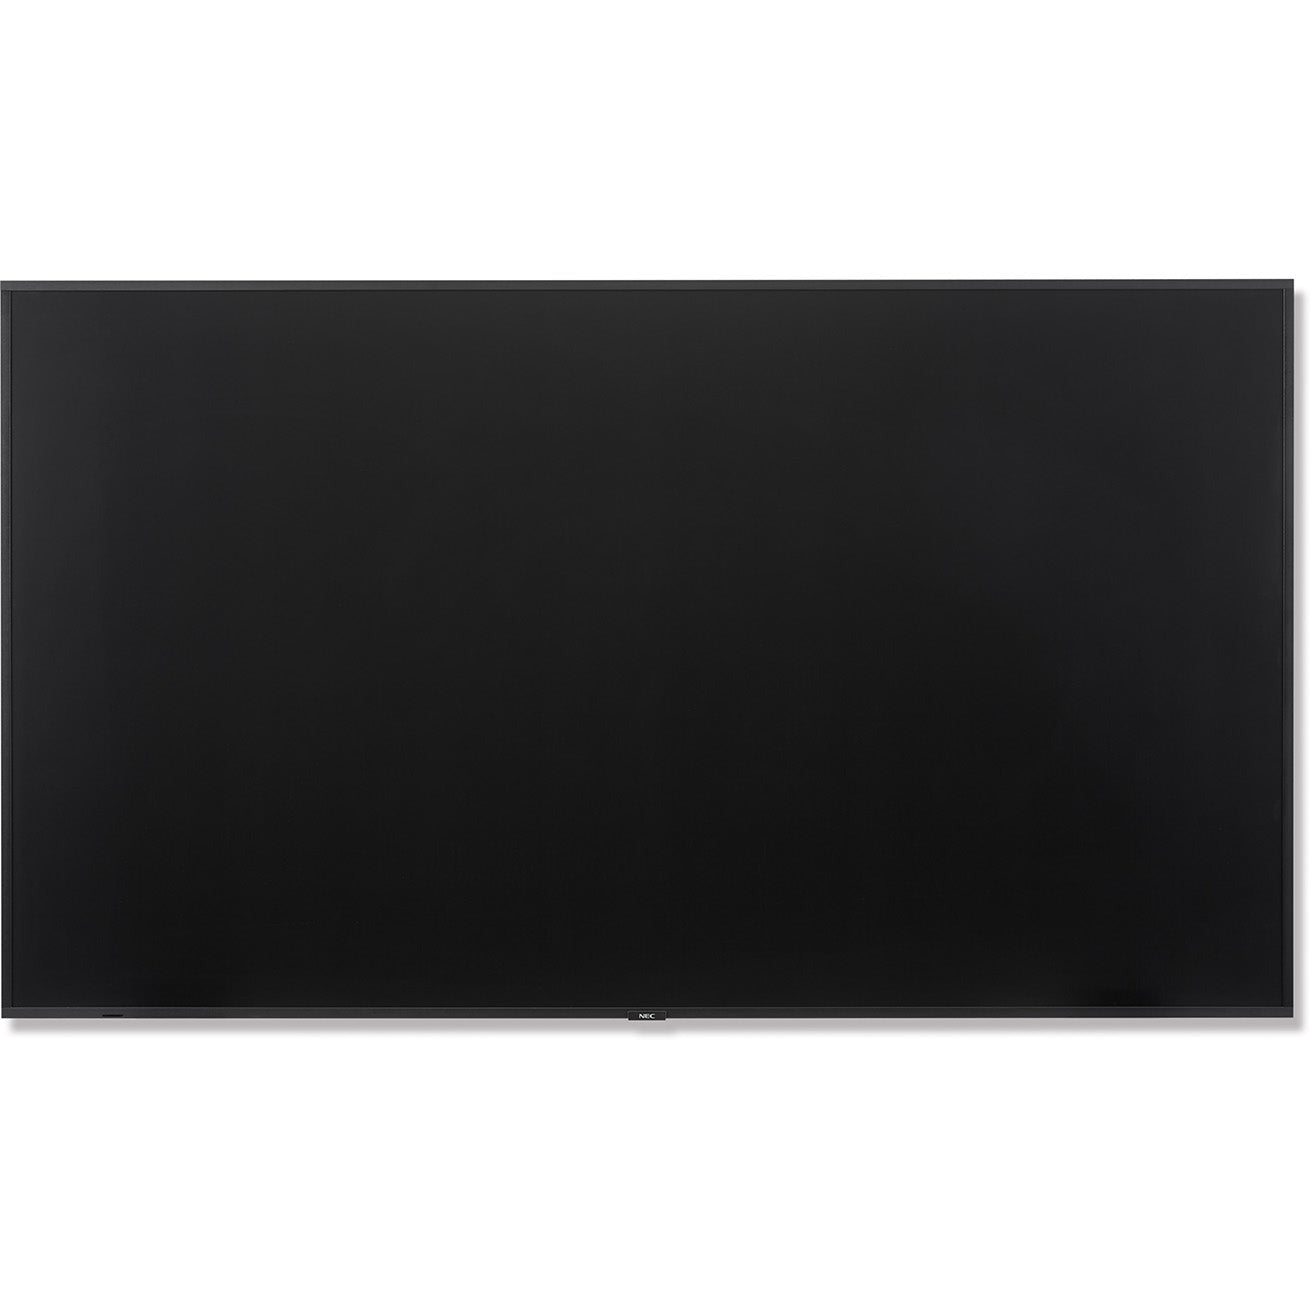 NEC MultiSync® M861 LCD 86" Message Large Format Display